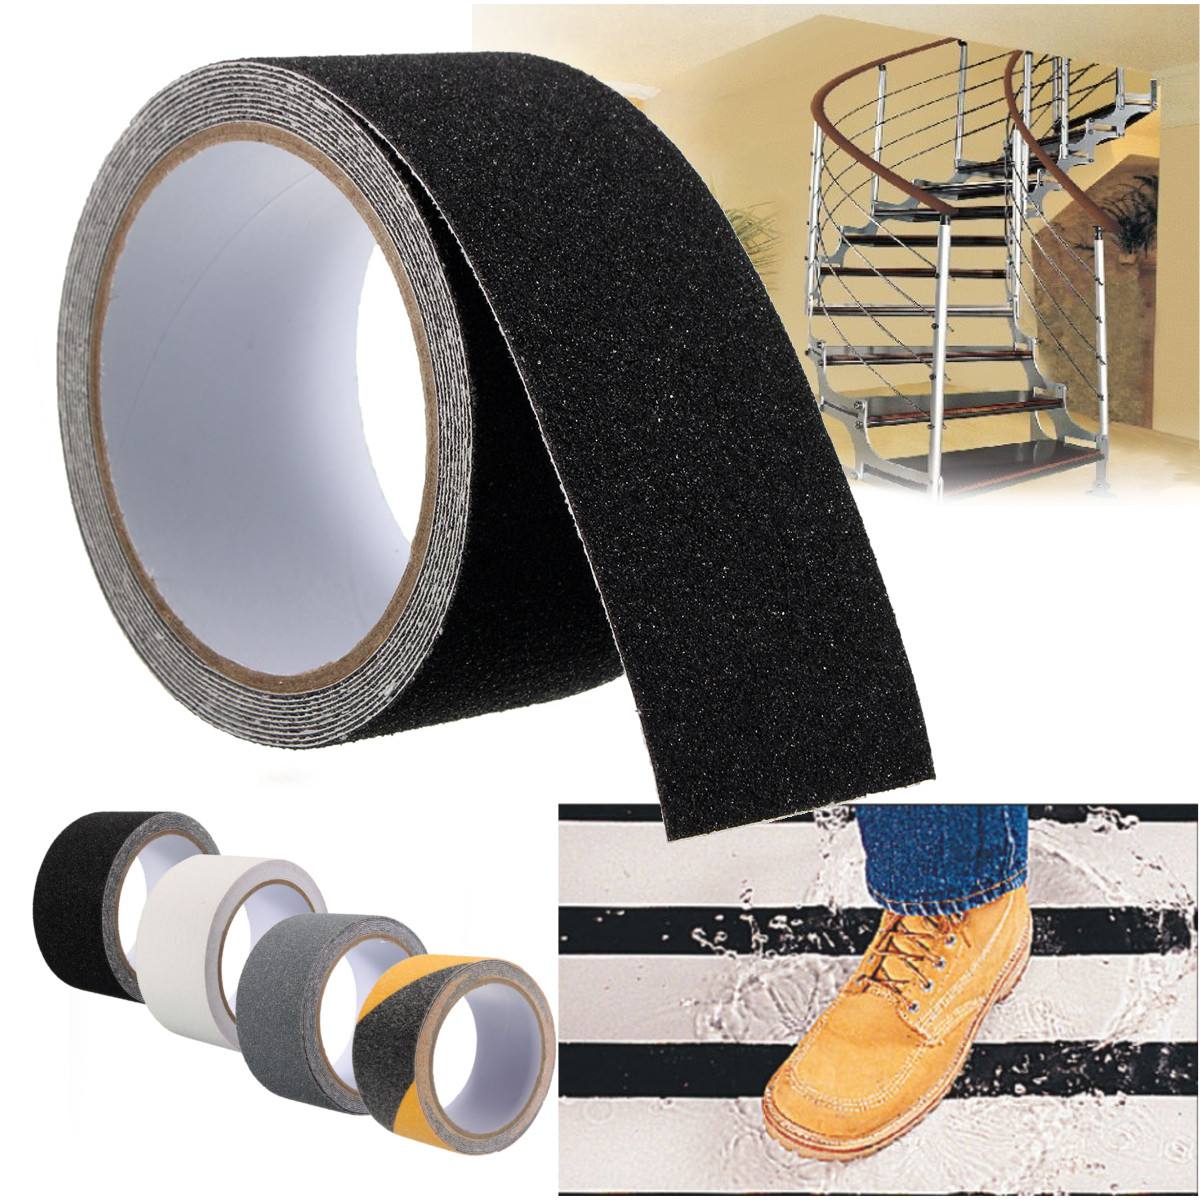 Non-Slip-Safety-Grip-Tape-Anti-Slip-Indoor-Outdoor-Stickers-Strong-Adhesive-Safety-Traction-Tape-Sta-1751585-1